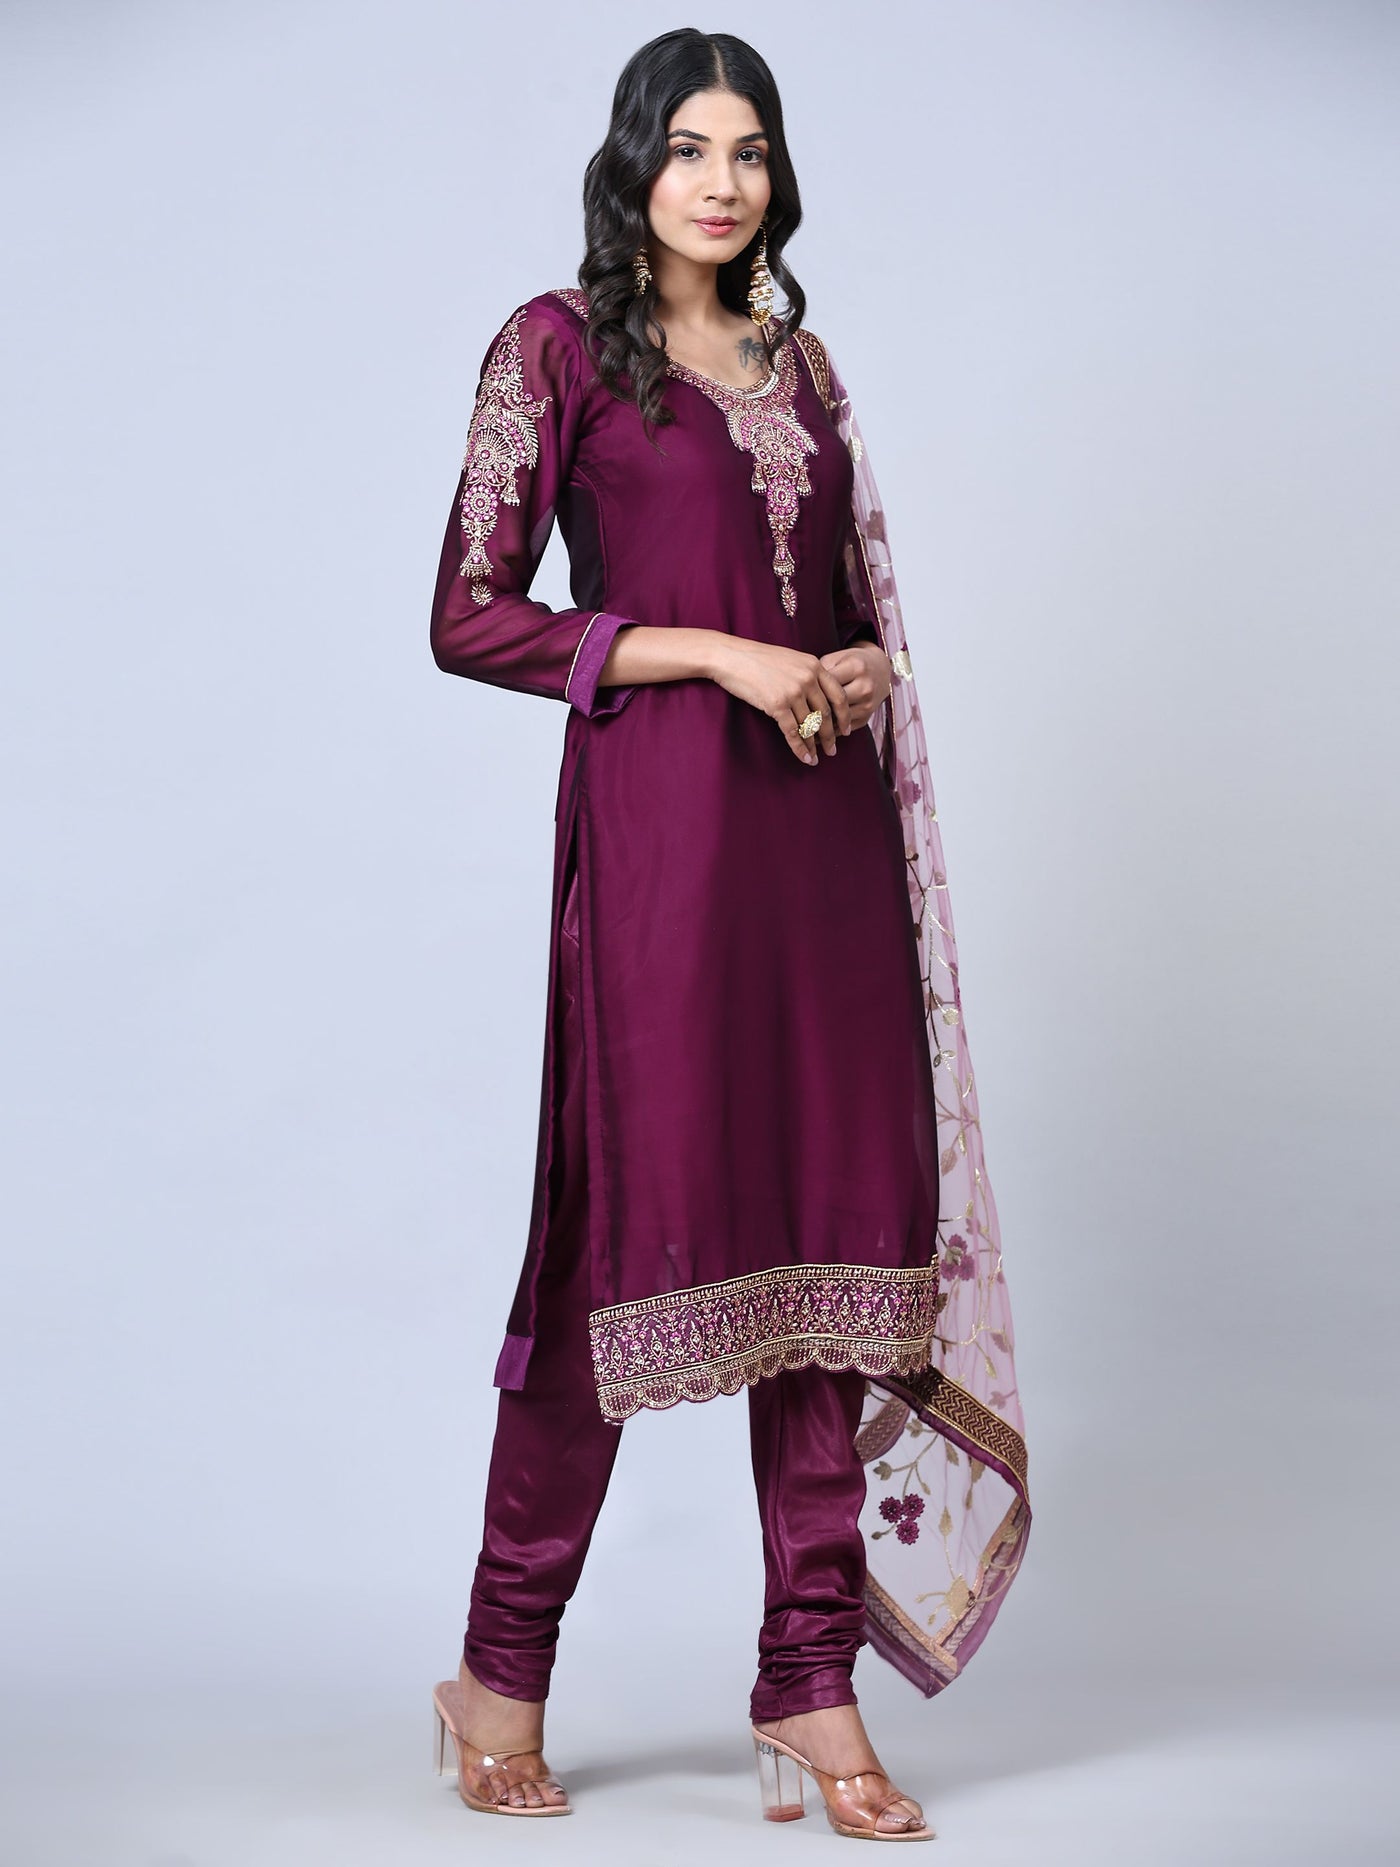 Purple Embroidered Georgette Semi Stitched Salwar Suit